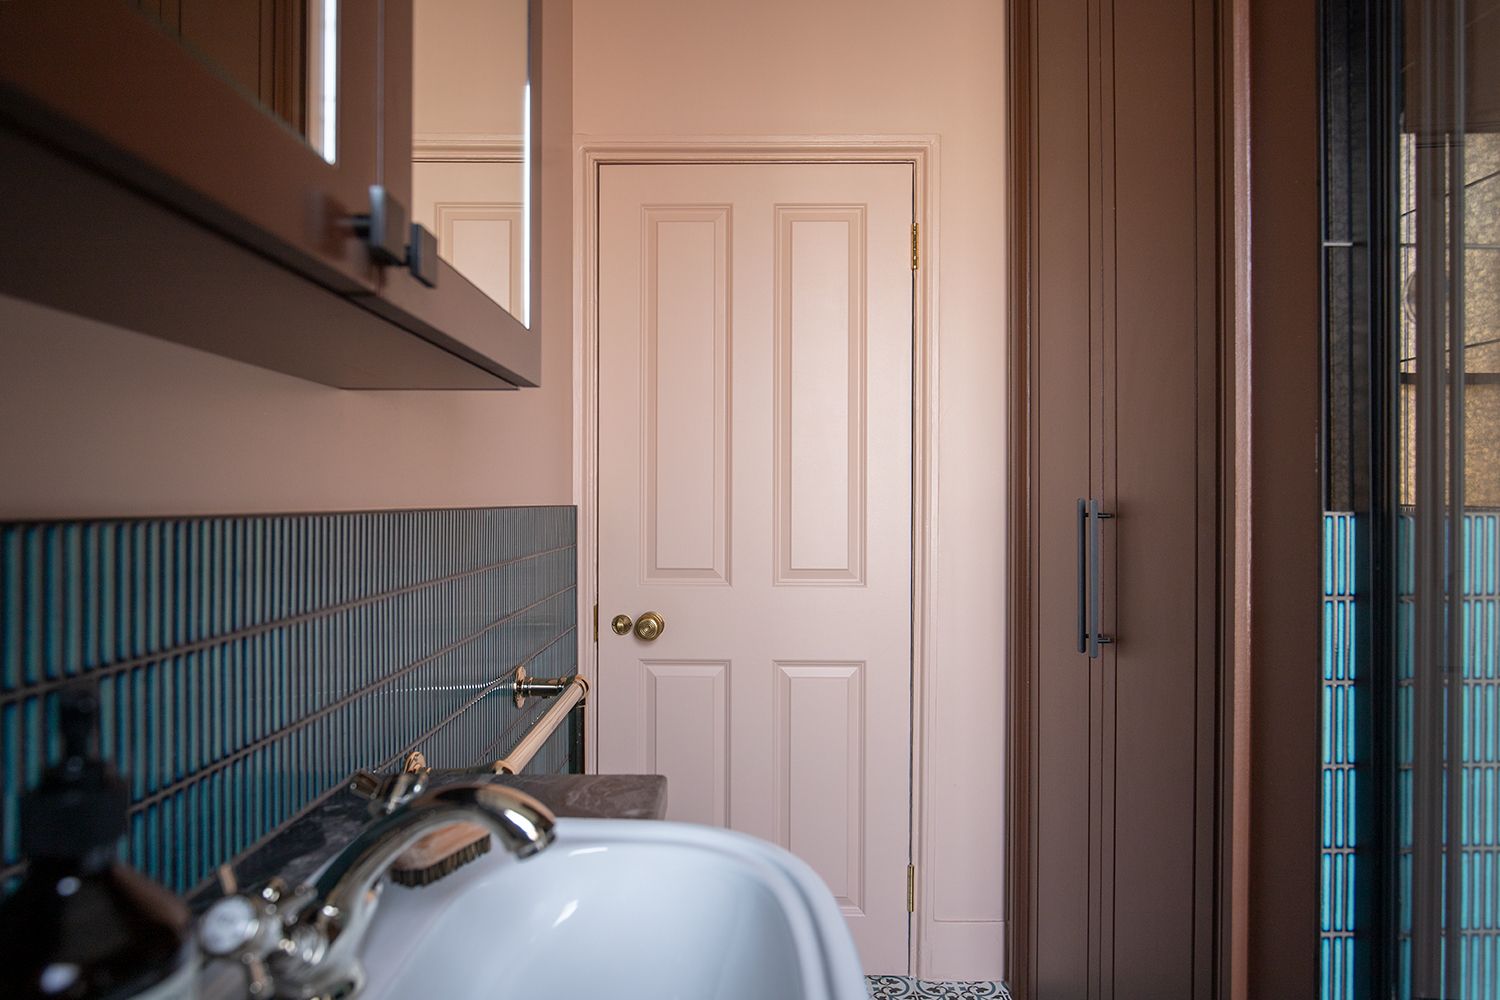 A photo looking along the bathroom cabinets to the back of the door, which is painted in a soft pink to match the walls.